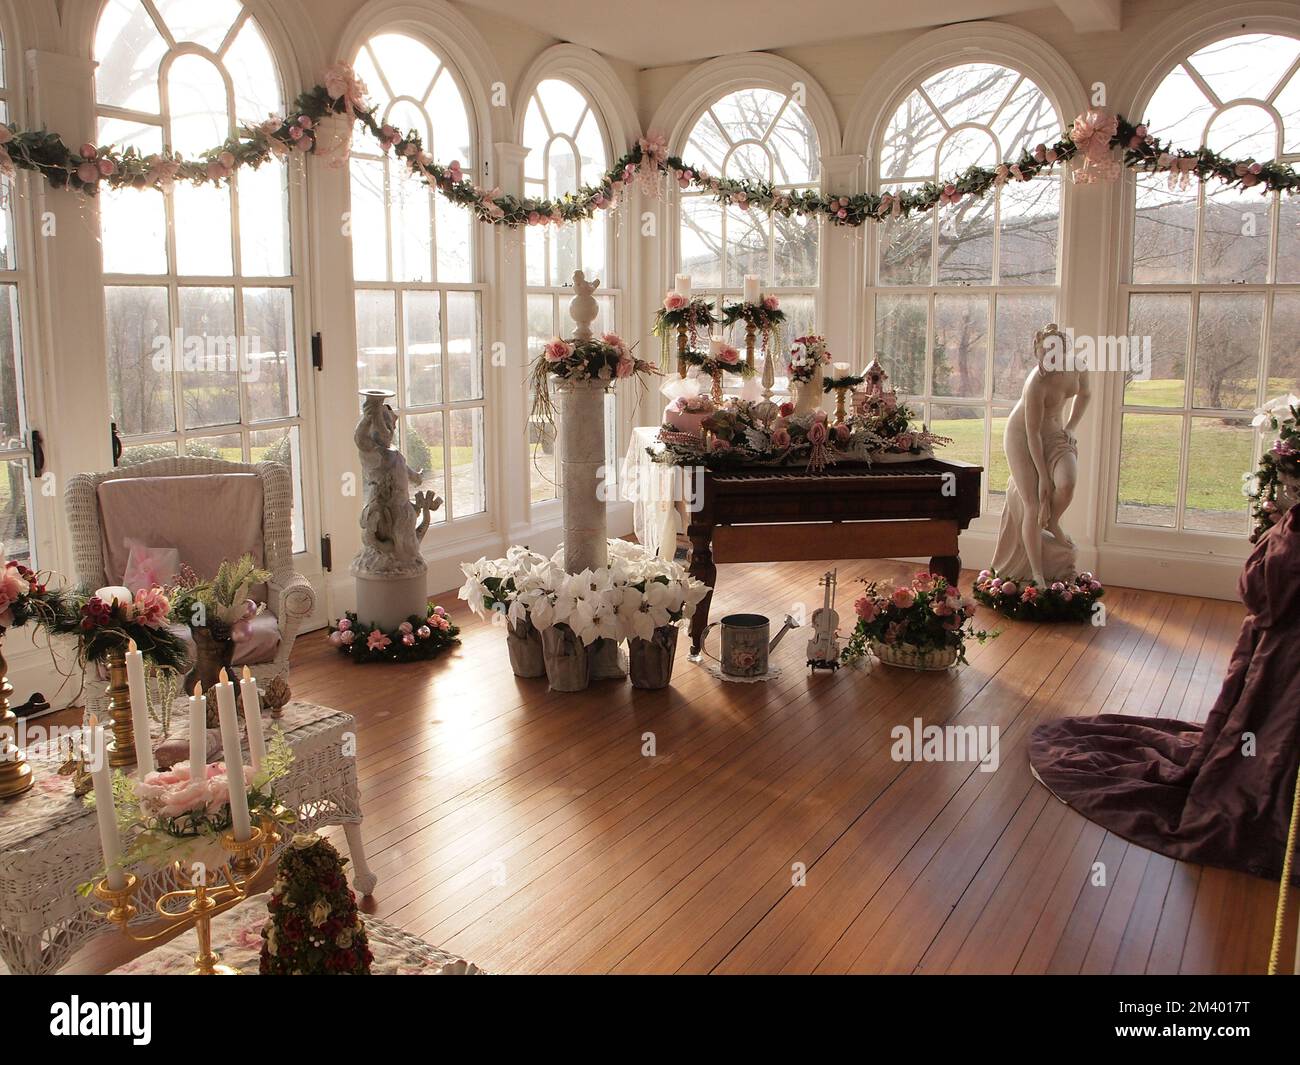 Ringwood Manor State Park in Ringwood New Jersey at the annual Victorian Christmas display showcasing the manor house and decorations. Stock Photo